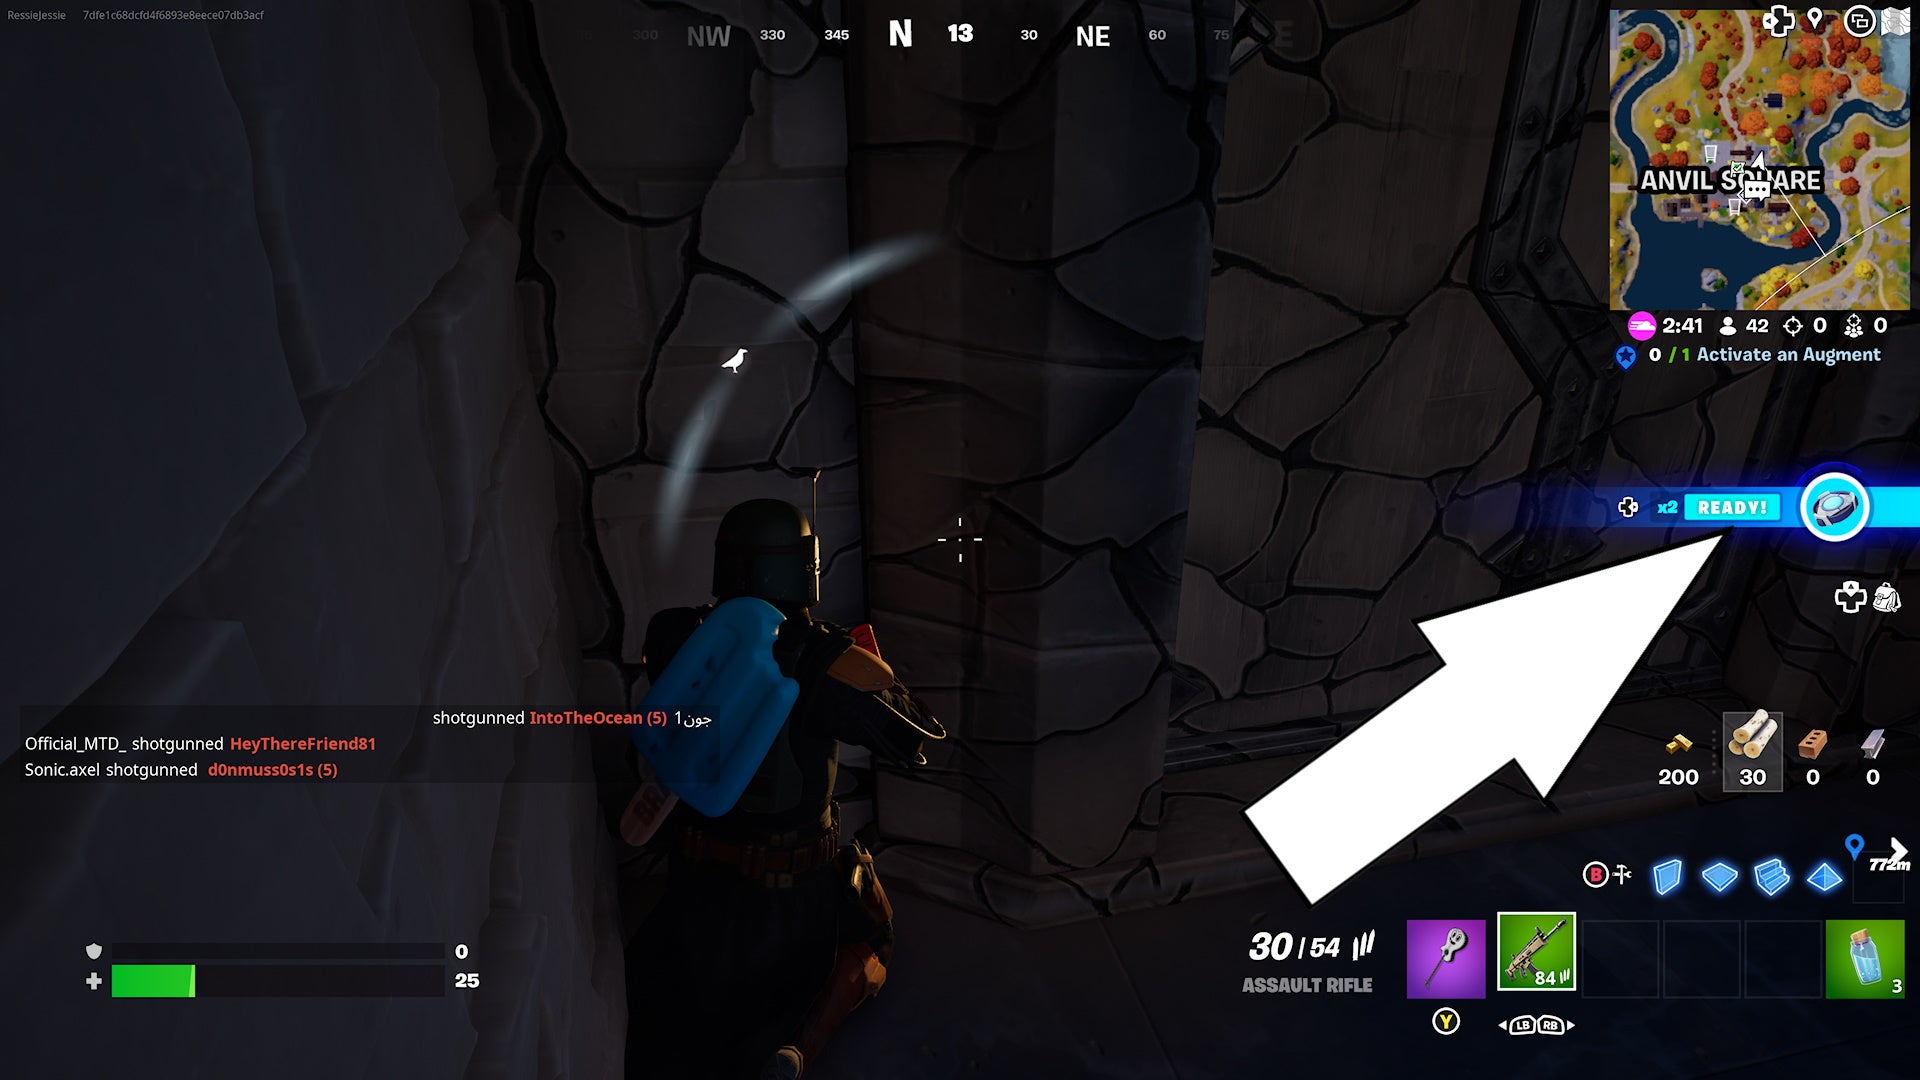 How To Activate An Augment In Fortnite